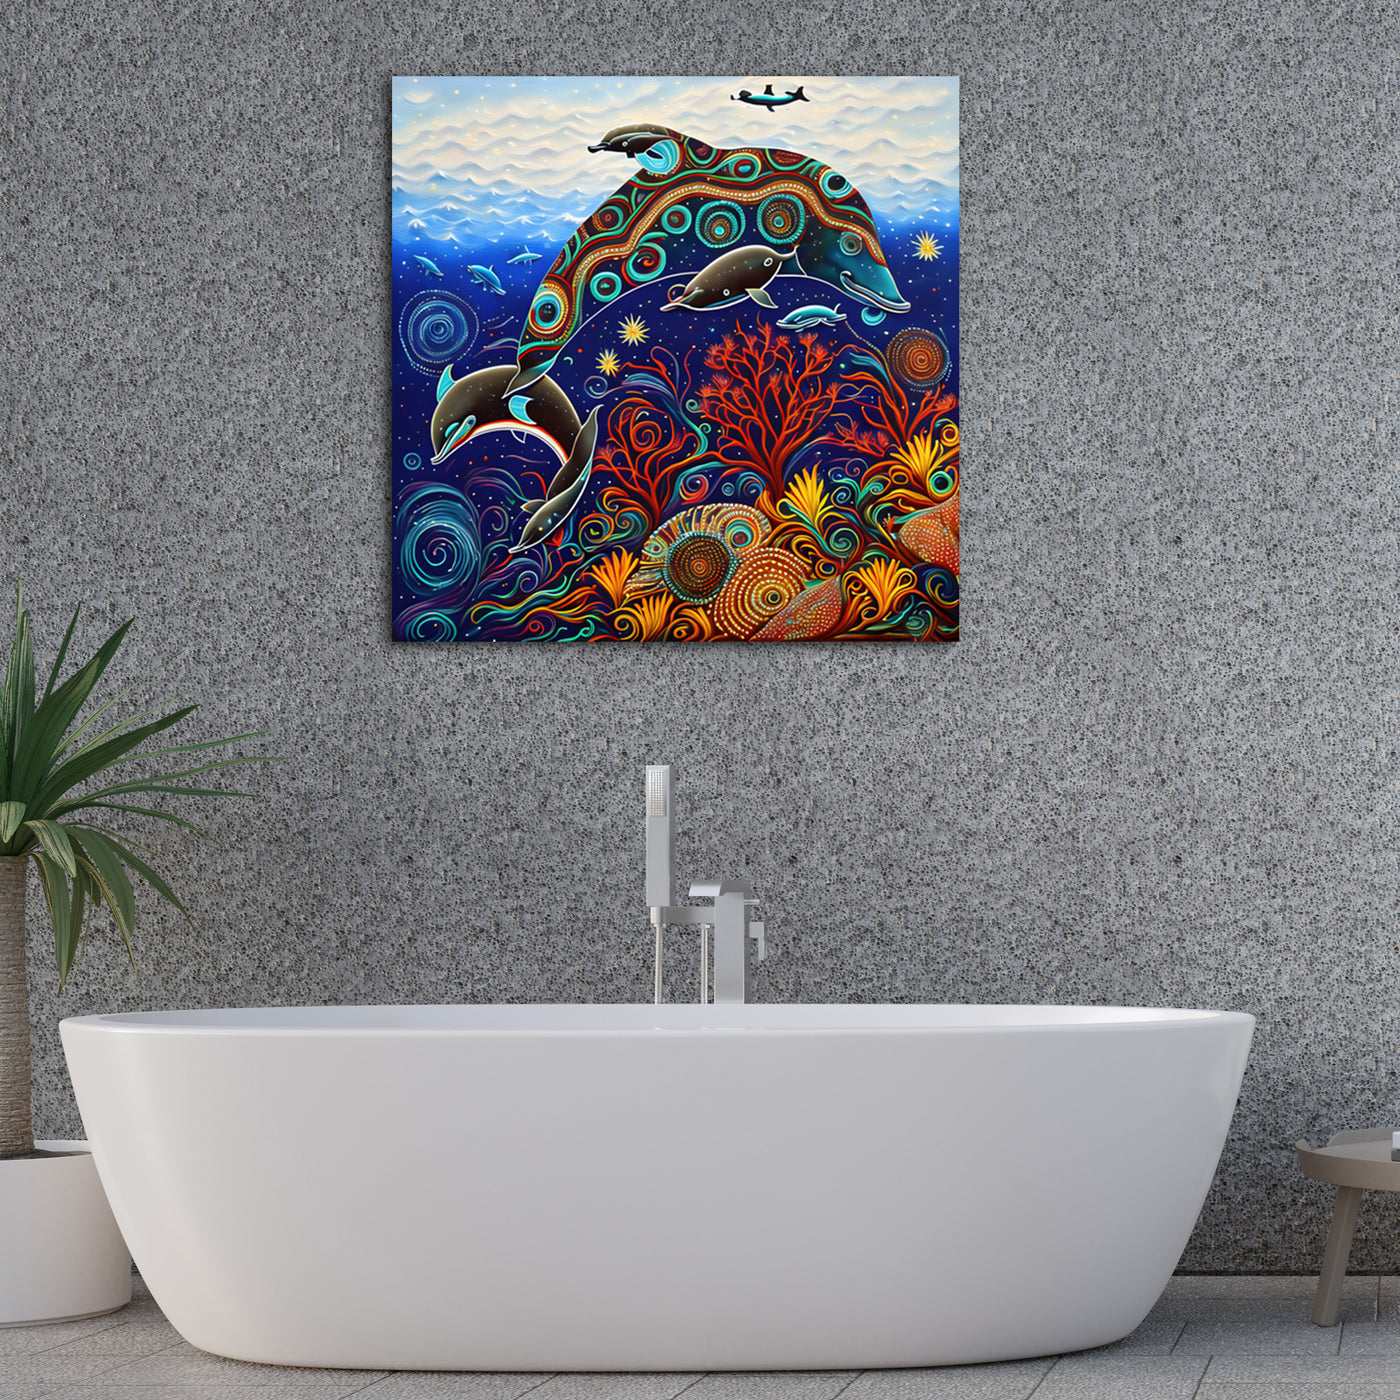 Dolphins In the Sea - Gallery Wrapped Canvas